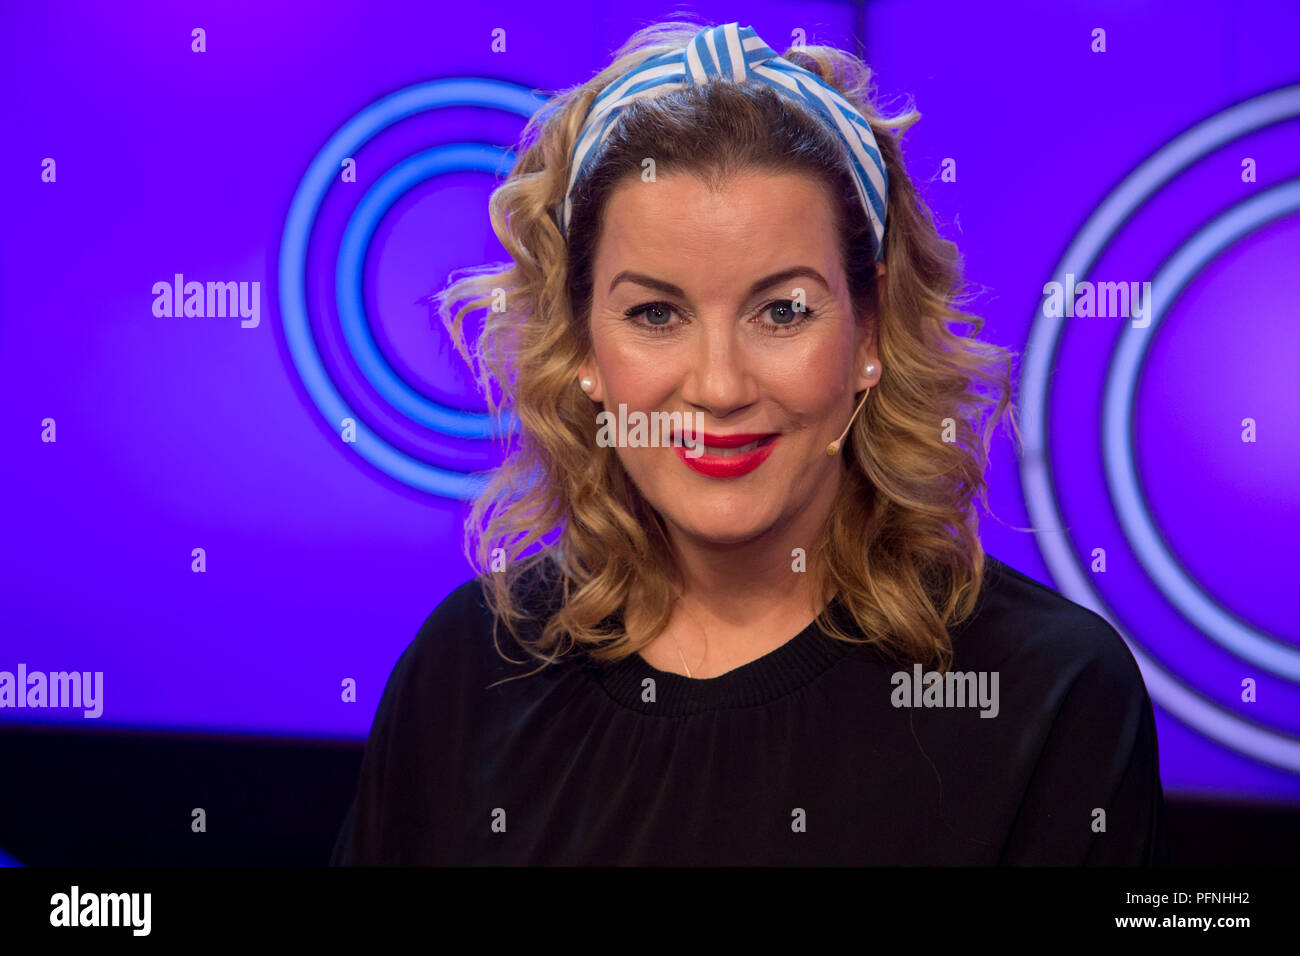 Alexa Maria SURHOLT, Germany, actress, portrait, portrait, Portrait, cropped single image, single motive, guest of the show 'Dingsda', TV program, recorded on 27.06.2018 in Koeln, | usage worldwide Stock Photo